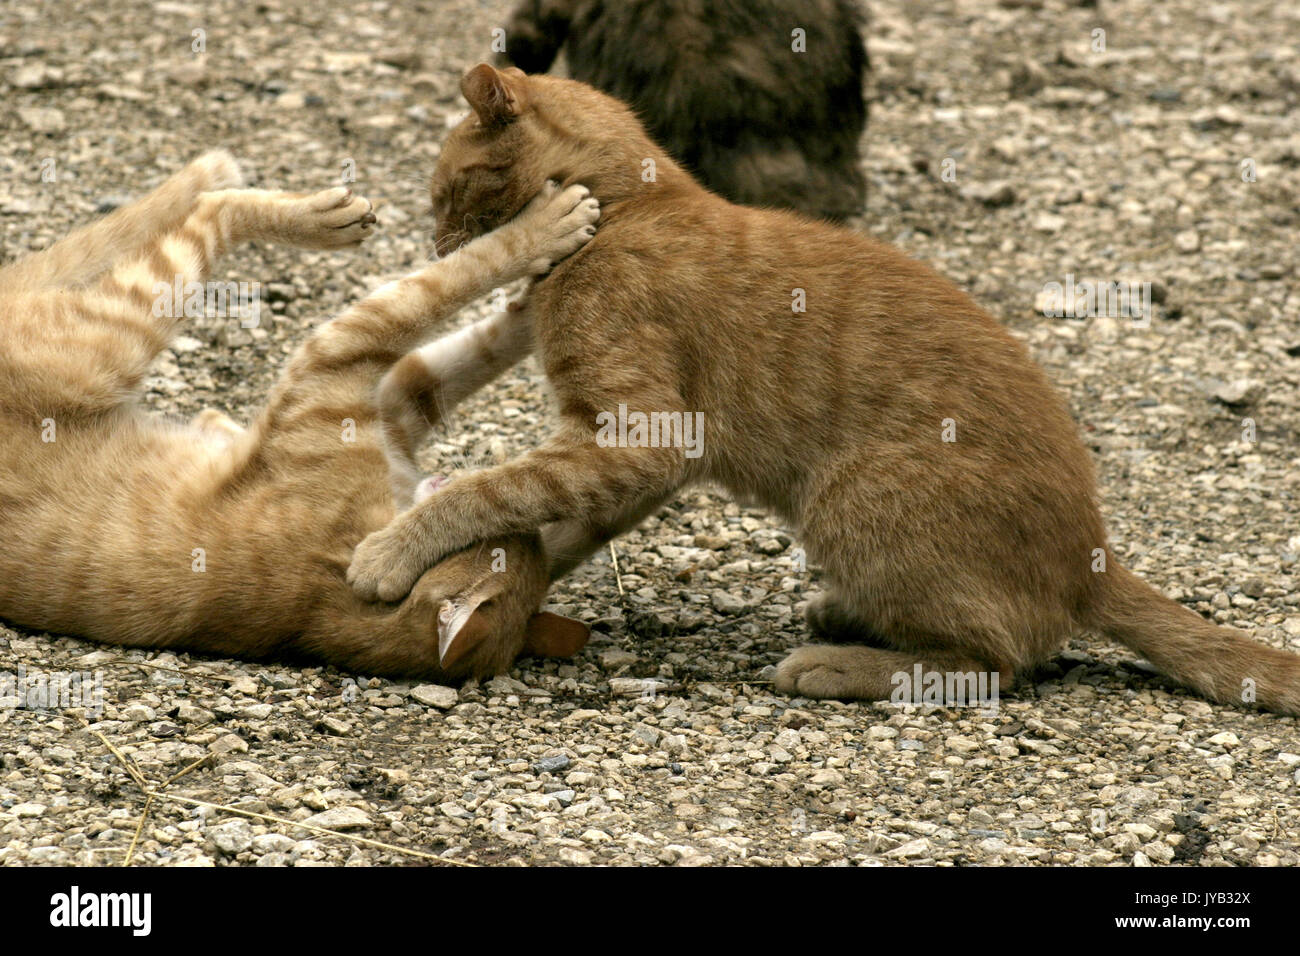 Two yellow cats playing outside Stock Photo